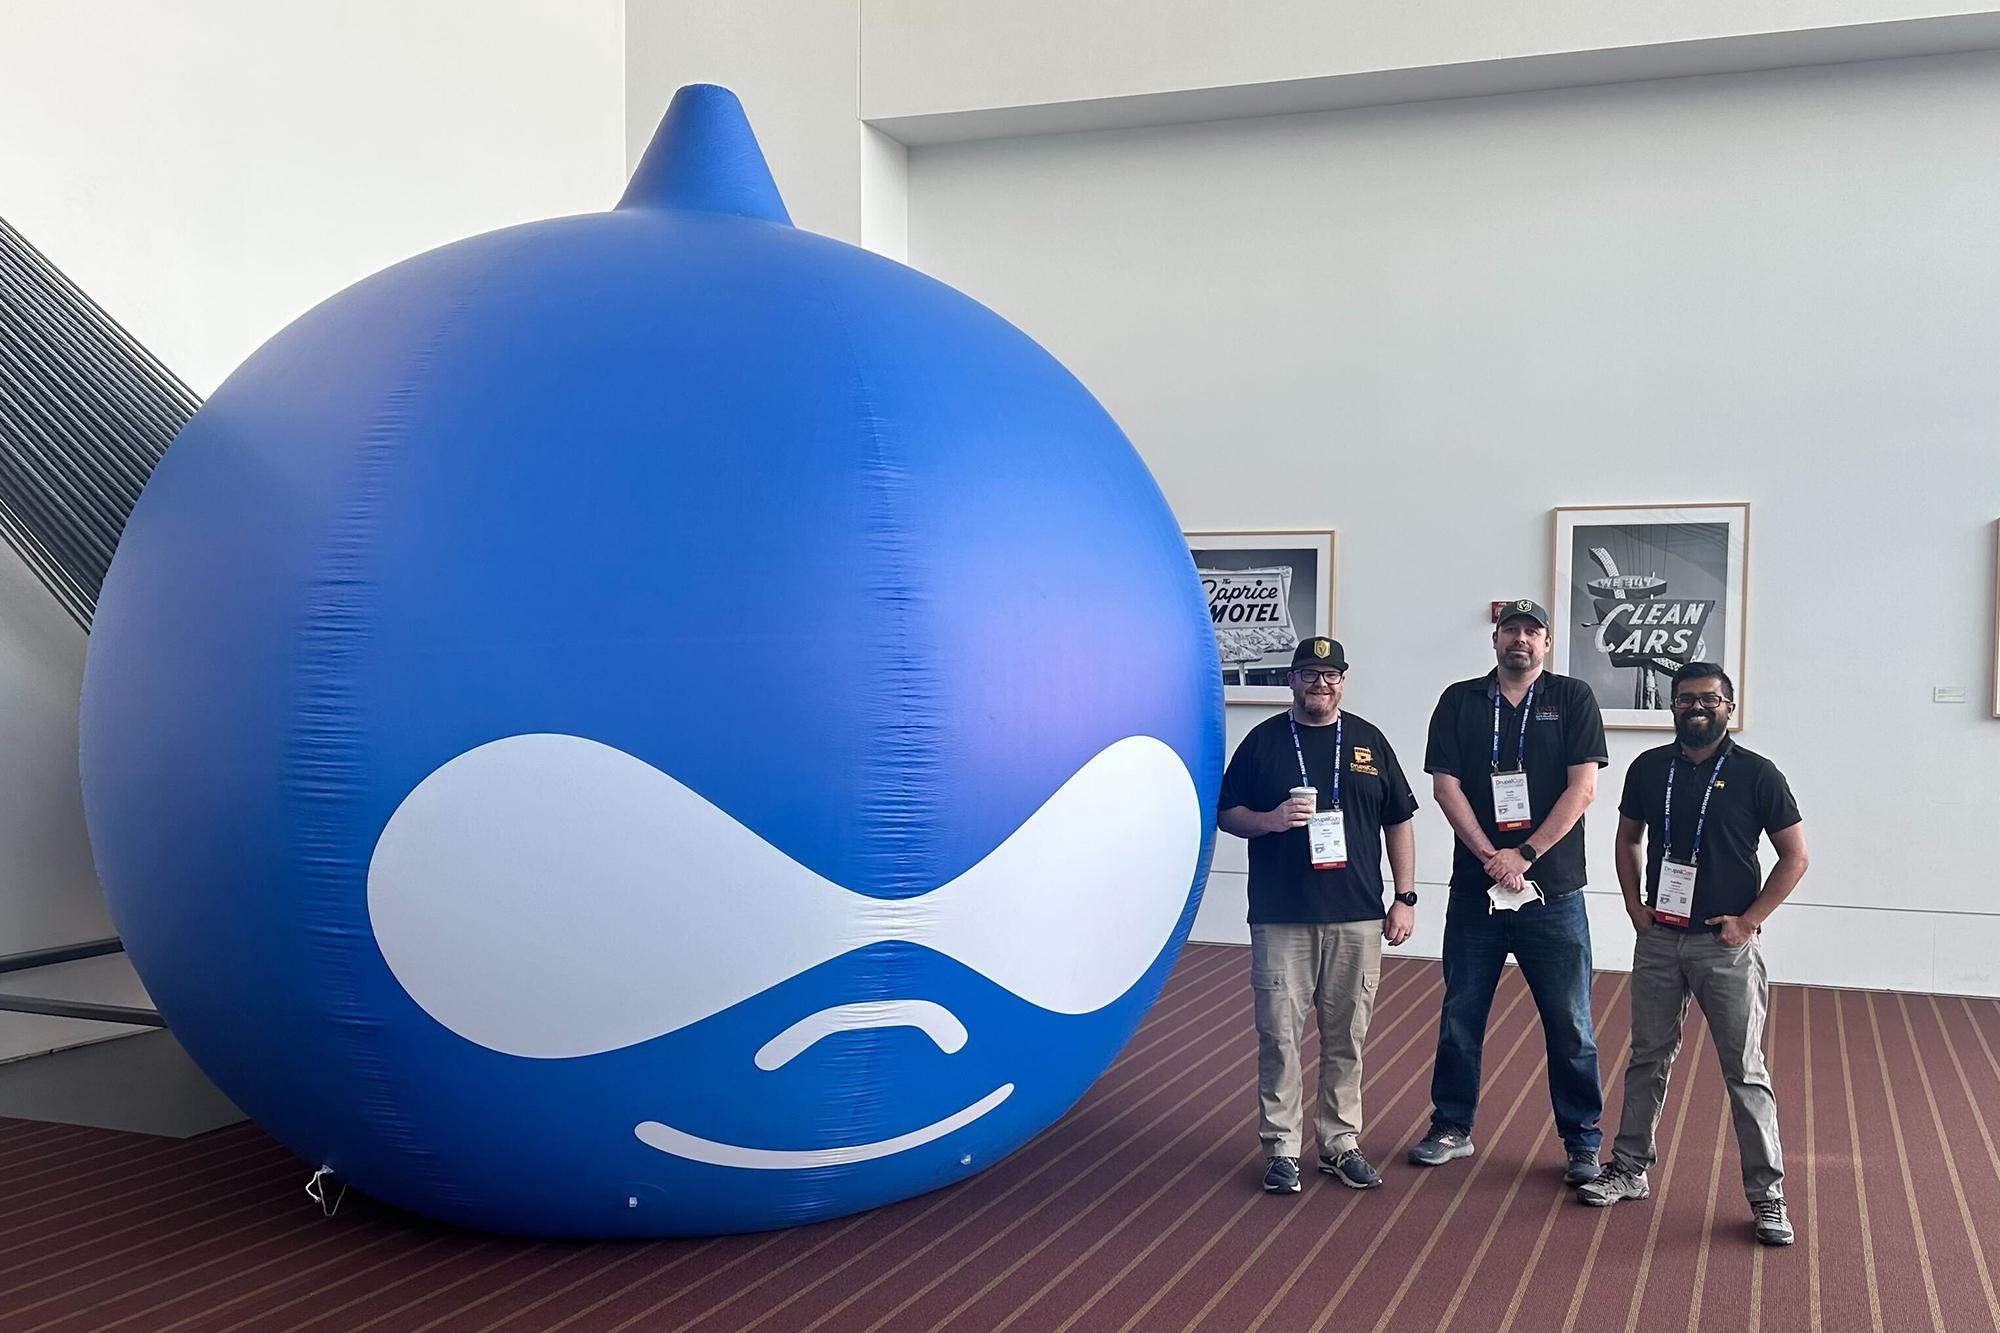 Group of people standing next to a large, blue inflatable water drop, the Drupalicon.